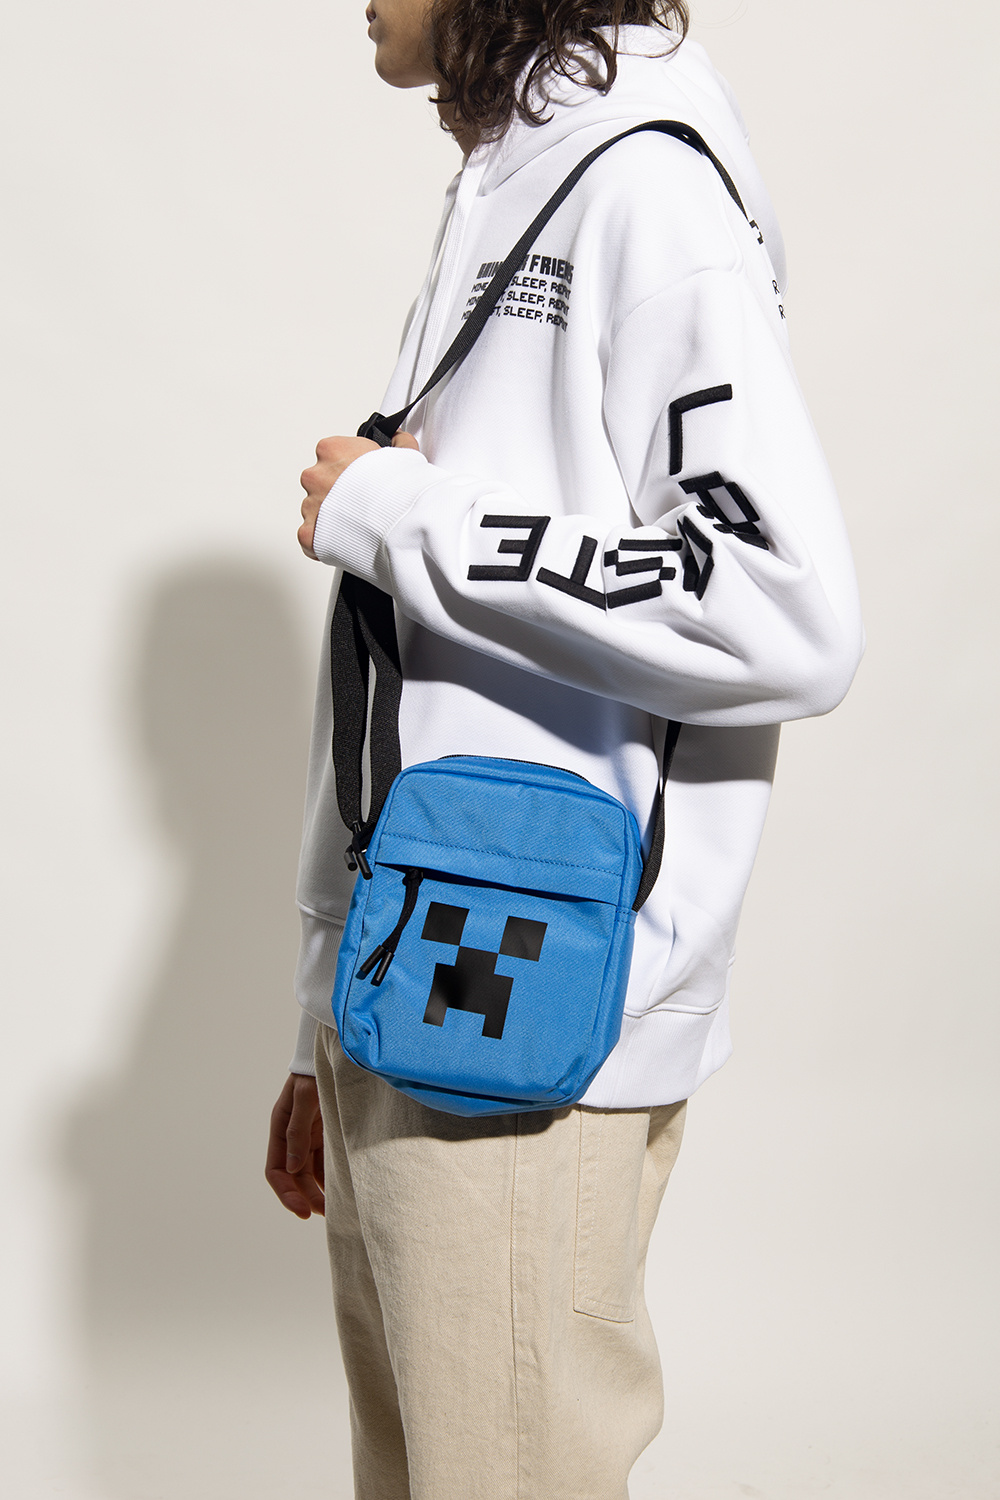 Exclusive: The New Lacoste x Minecraft Capsule Redefines Creative